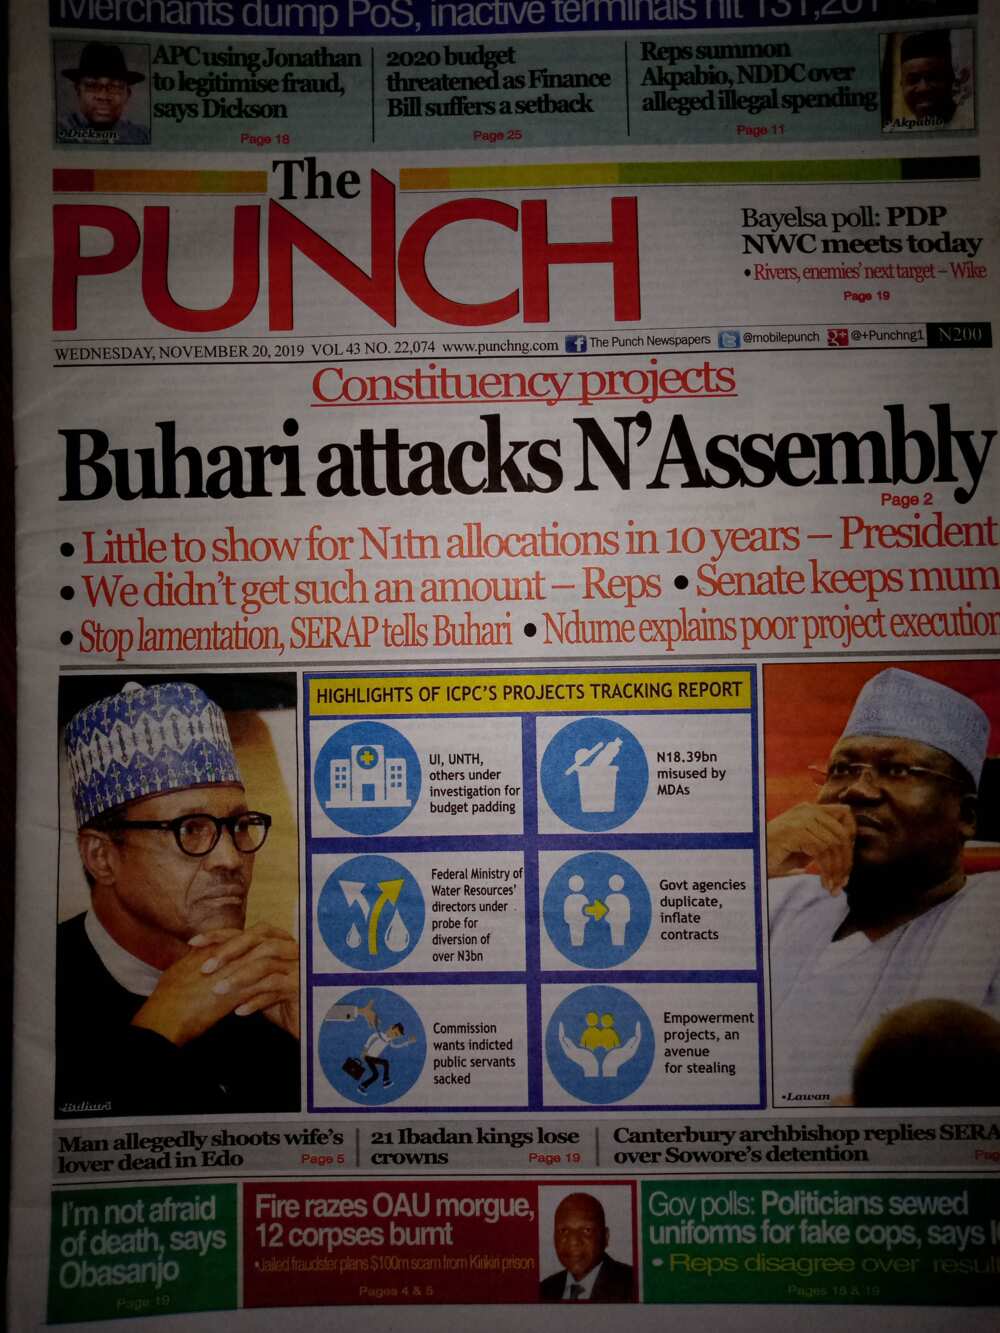 The Punch newspaper review of November 20